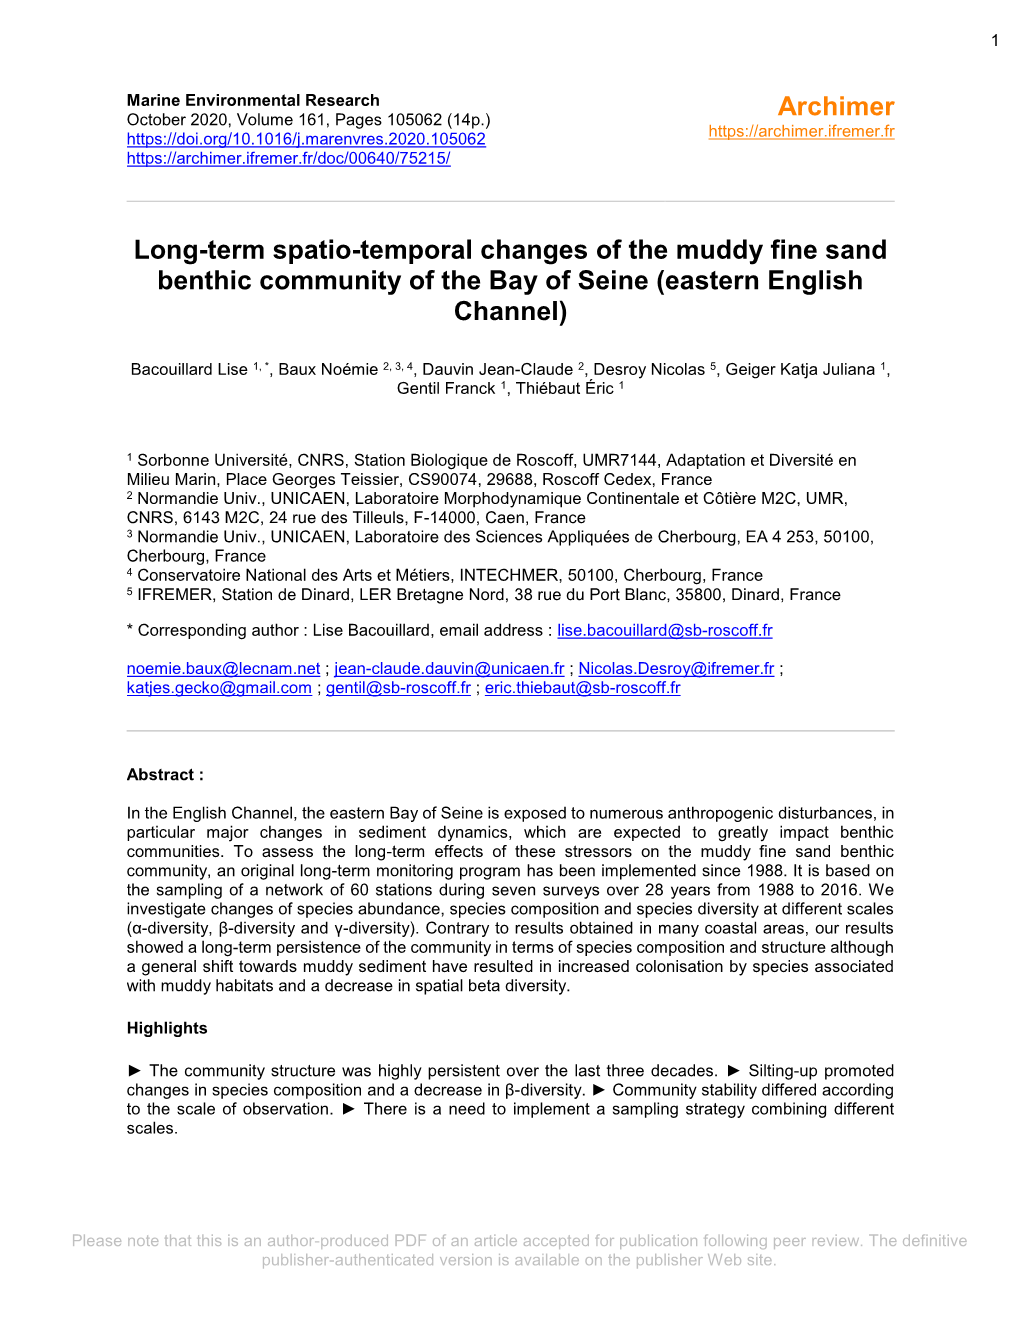 Long-Term Spatio-Temporal Changes of the Muddy Fine Sand Benthic Community of the Bay of Seine (Eastern English Channel)